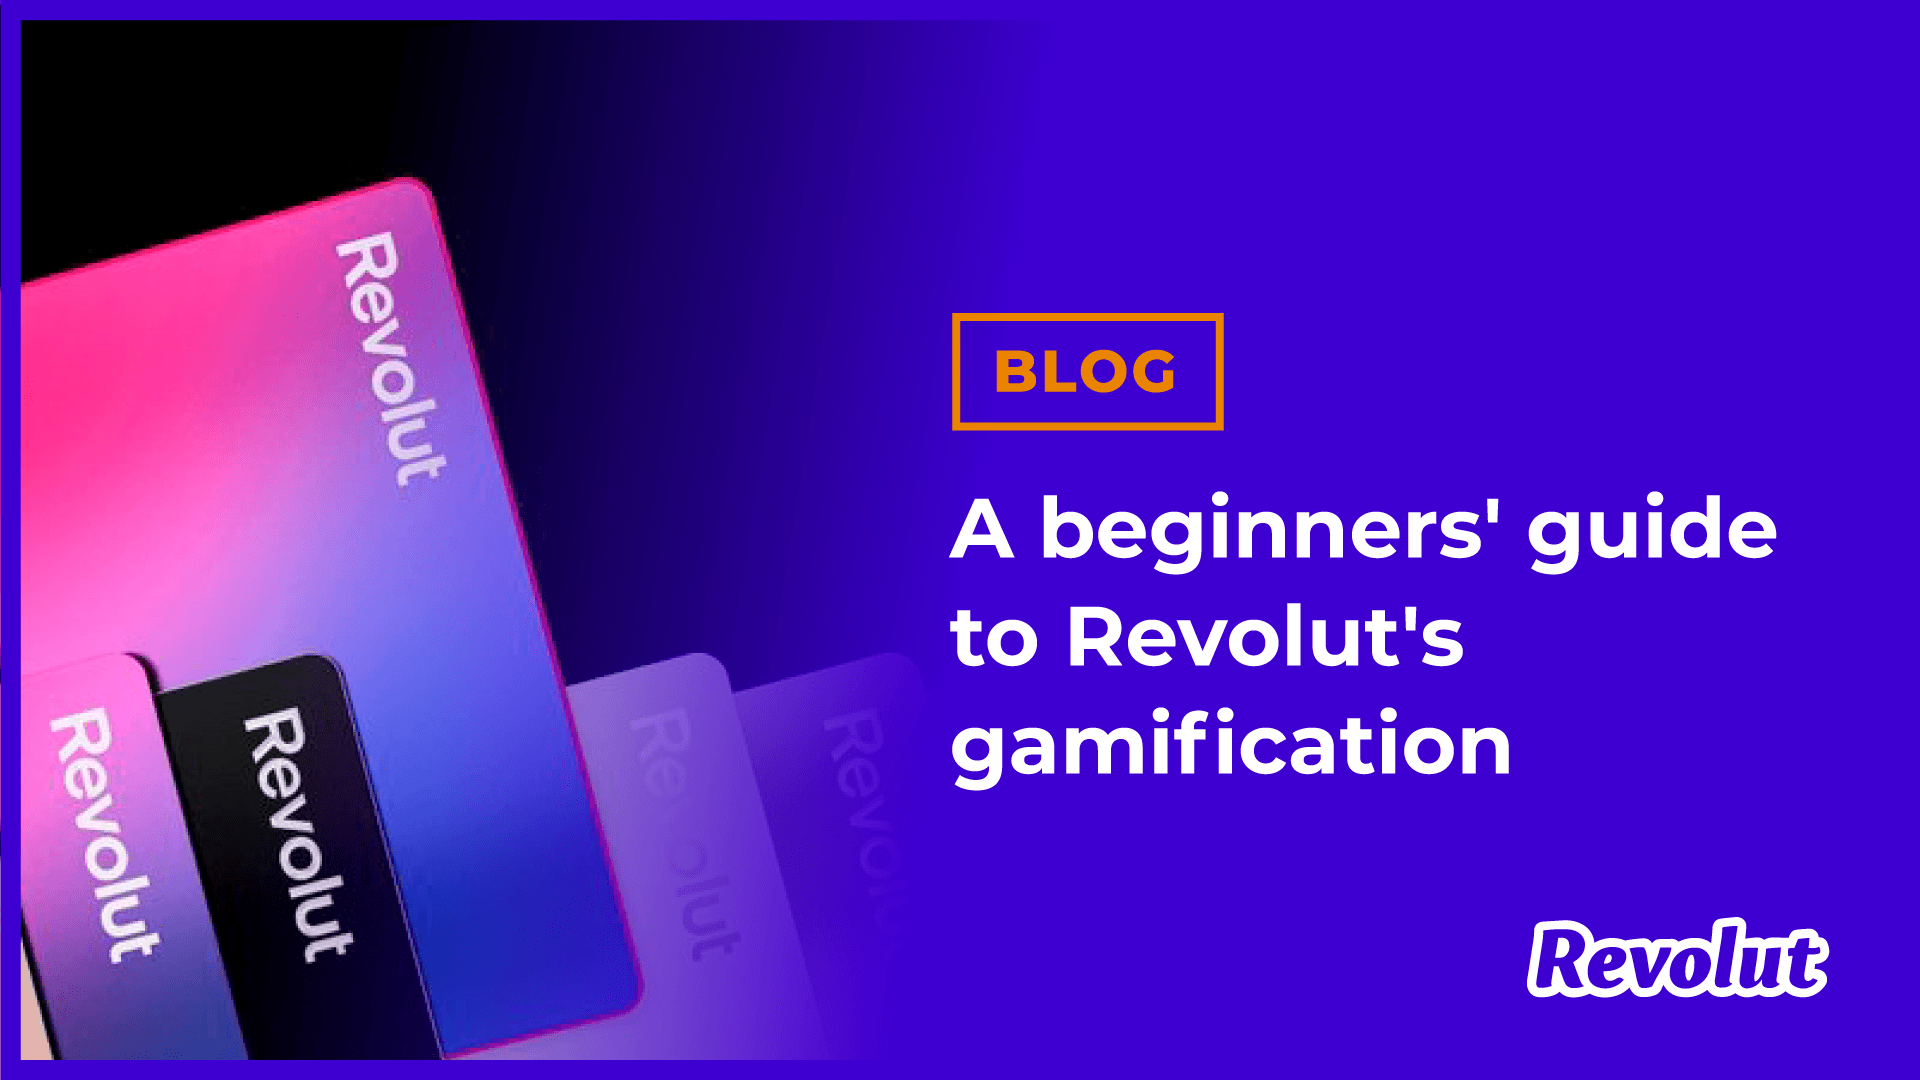 5 ways Revolut creates the best banking app with gamification